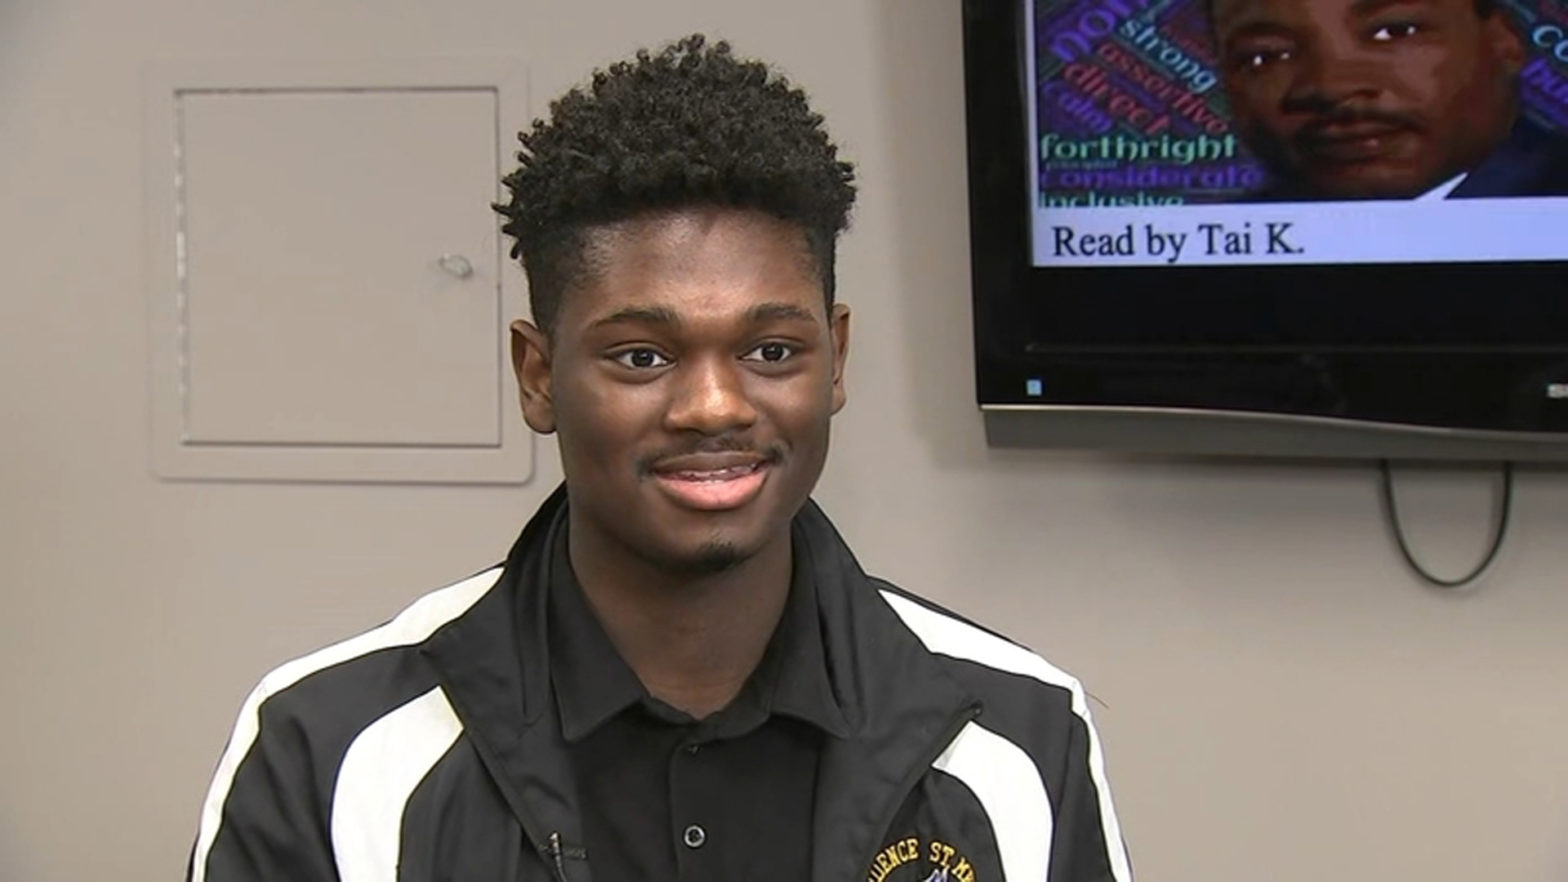 Mario Hoover Scores Perfect On His ACT, Becomes A Part Of The Less Than 1% To Achieve The Feat Nationally